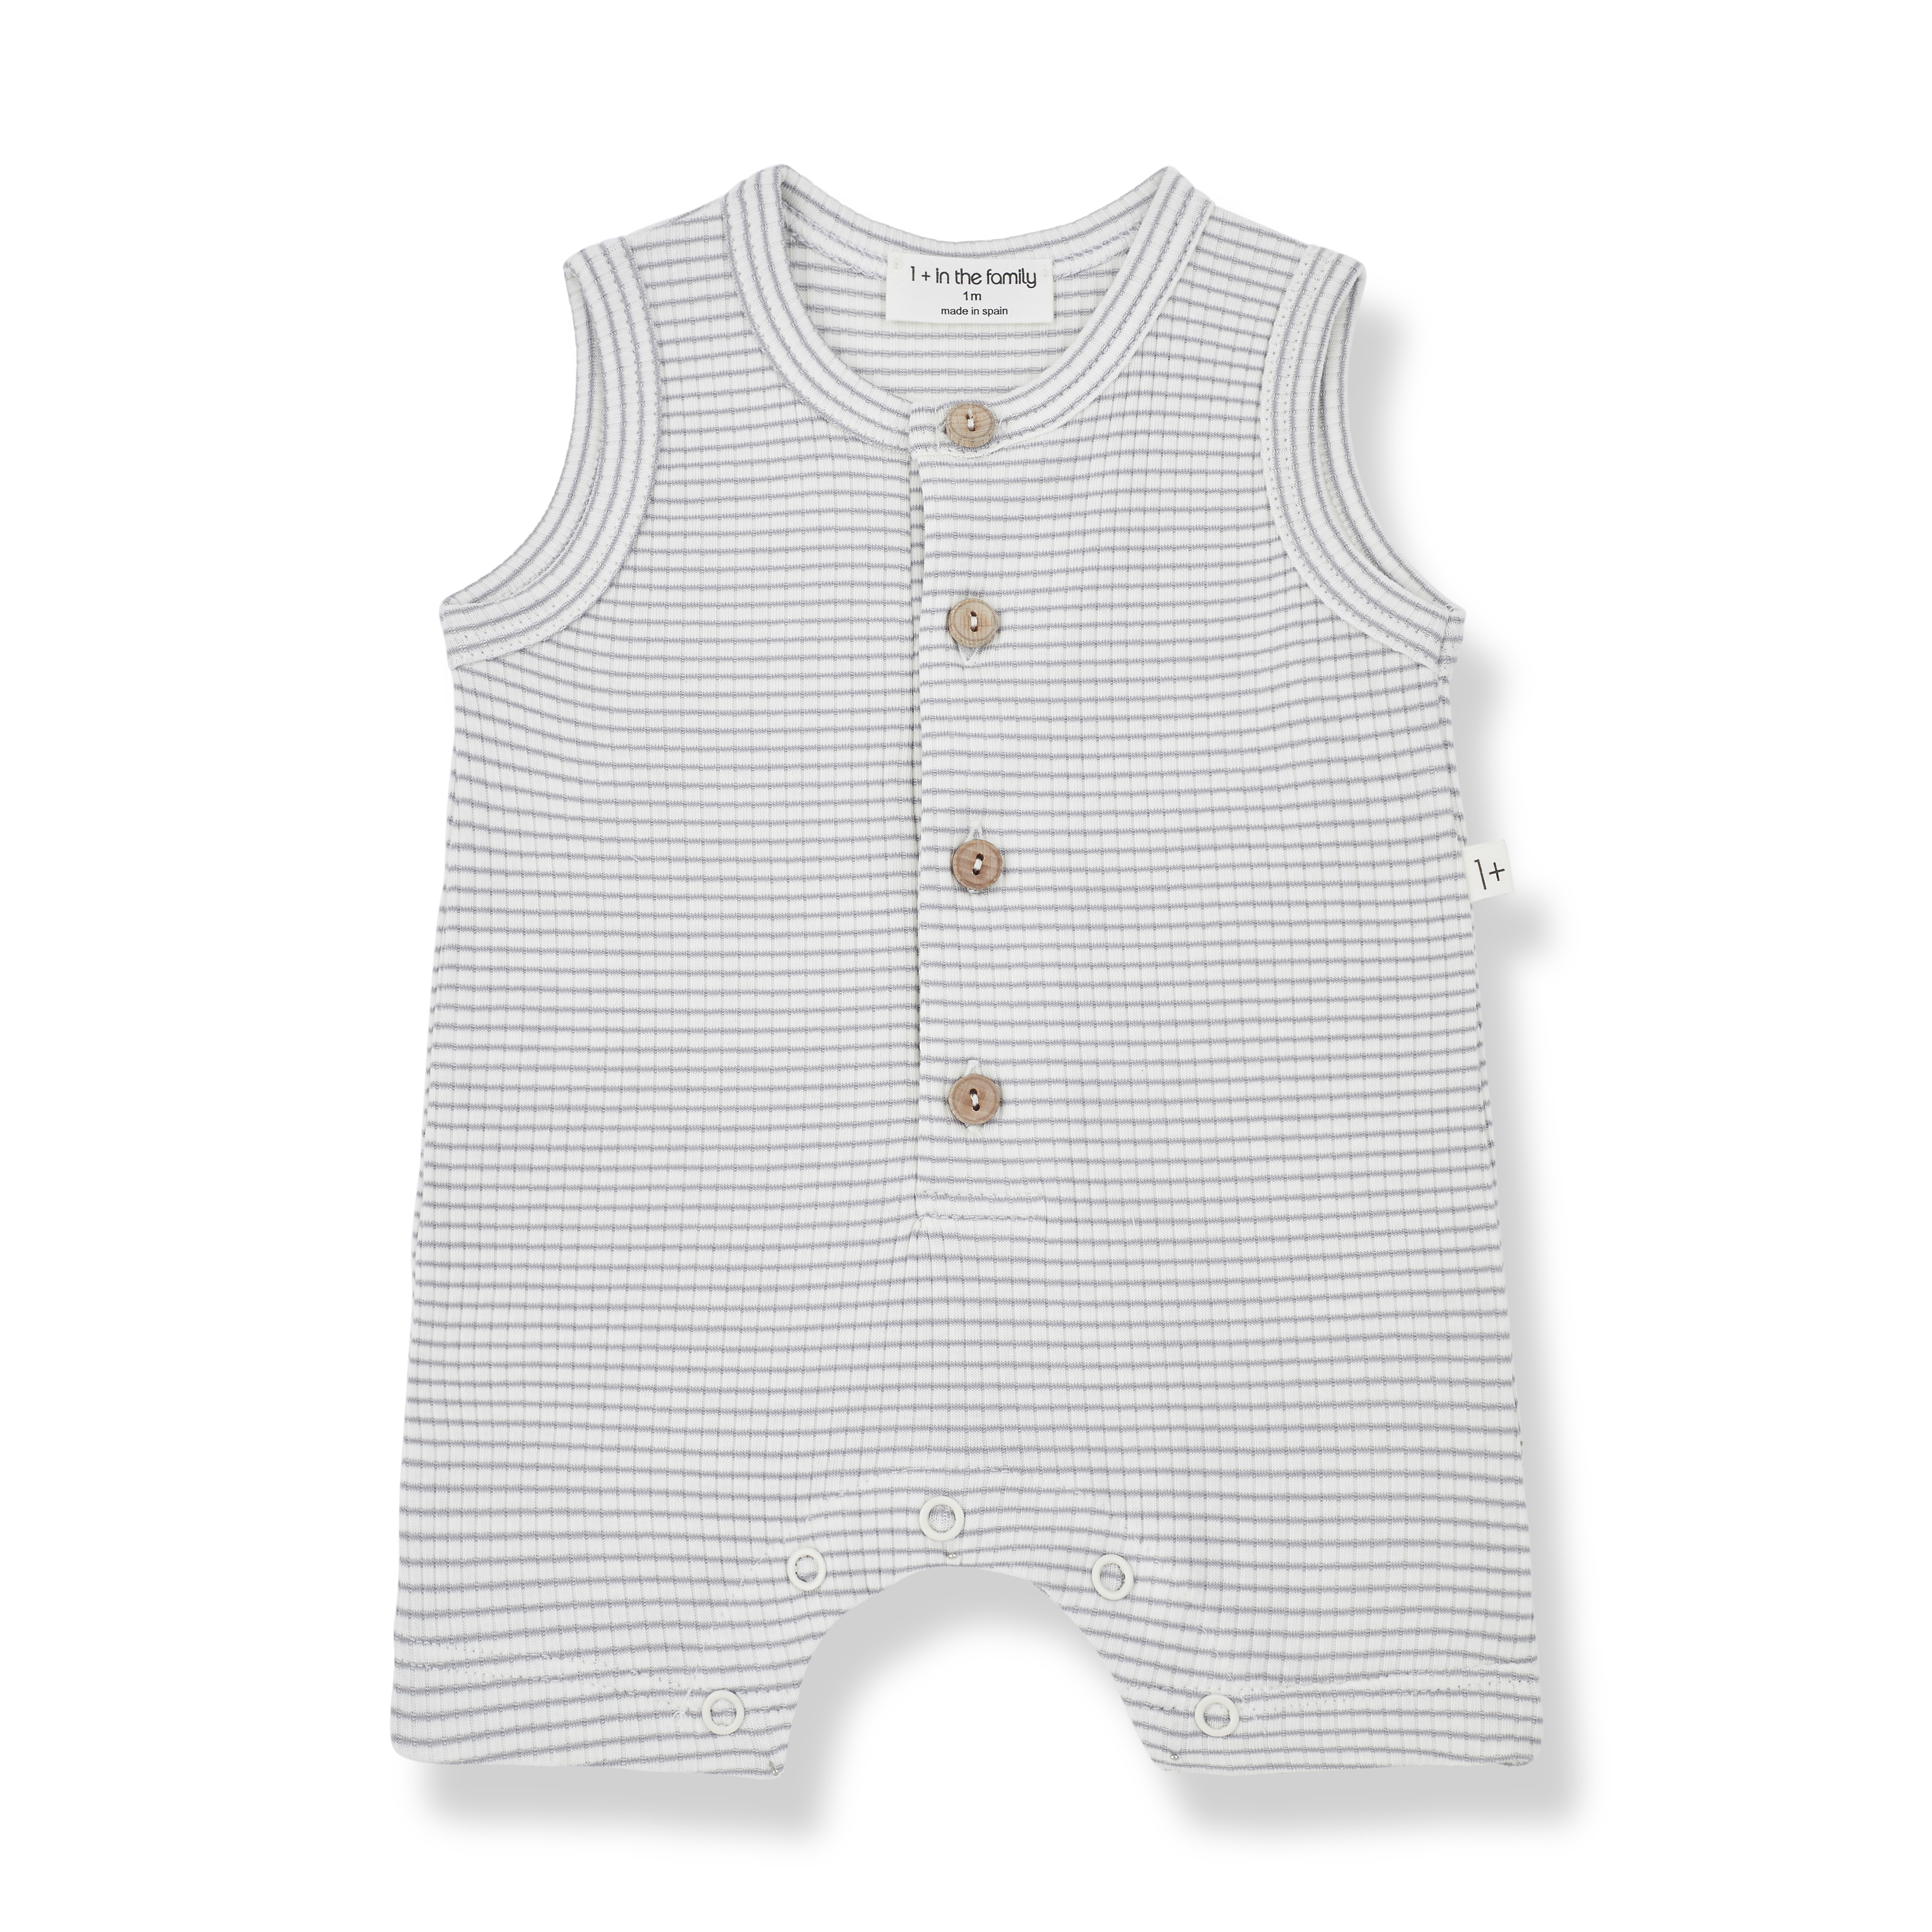 1+ in the family - pino - romper - smoky/ivory